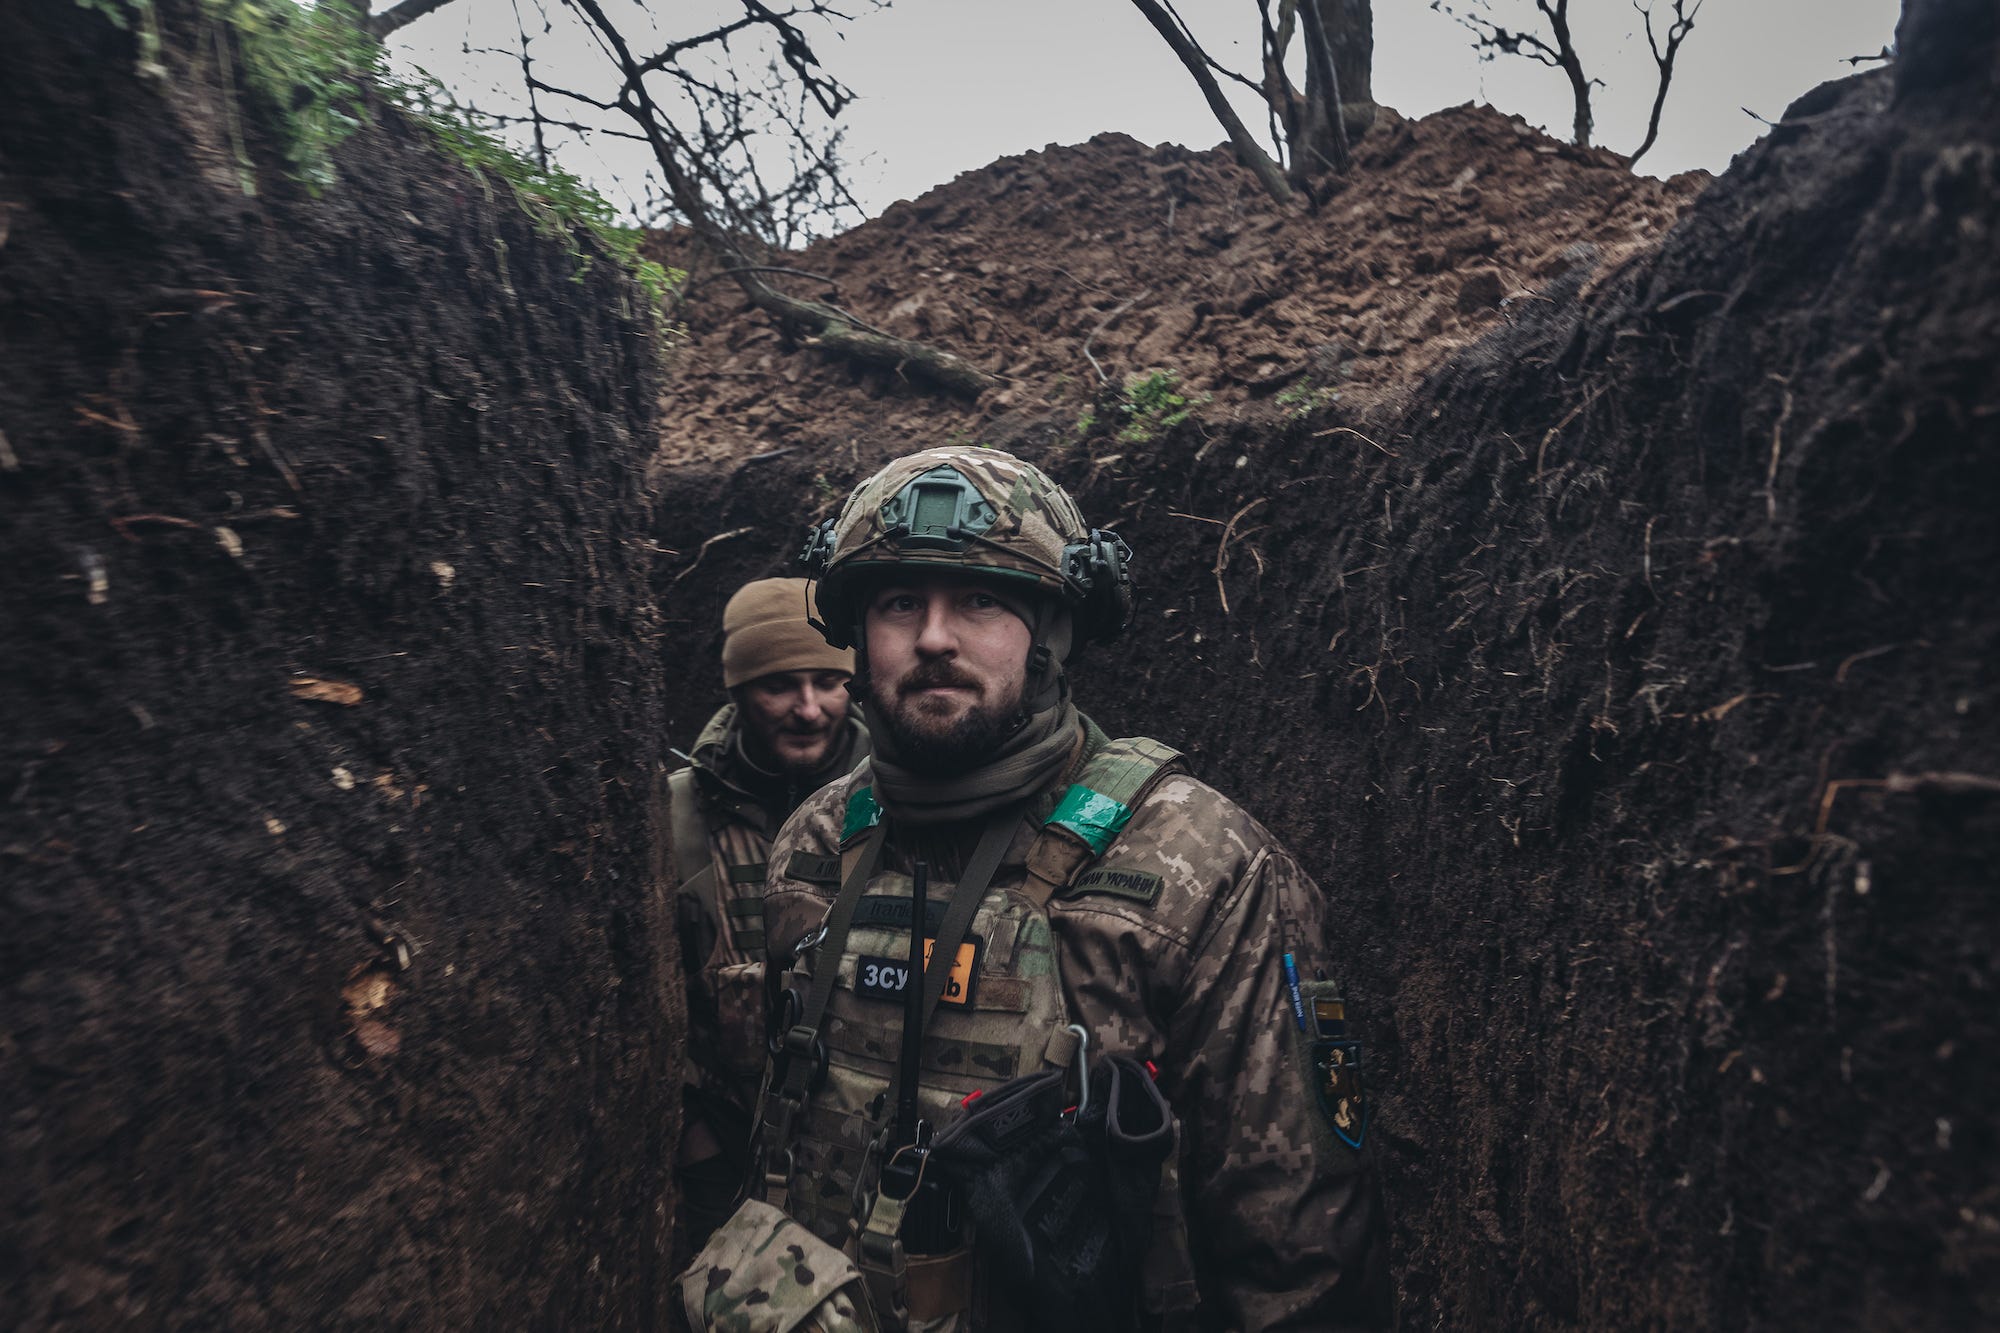 Ukrainian soldiers in a trench